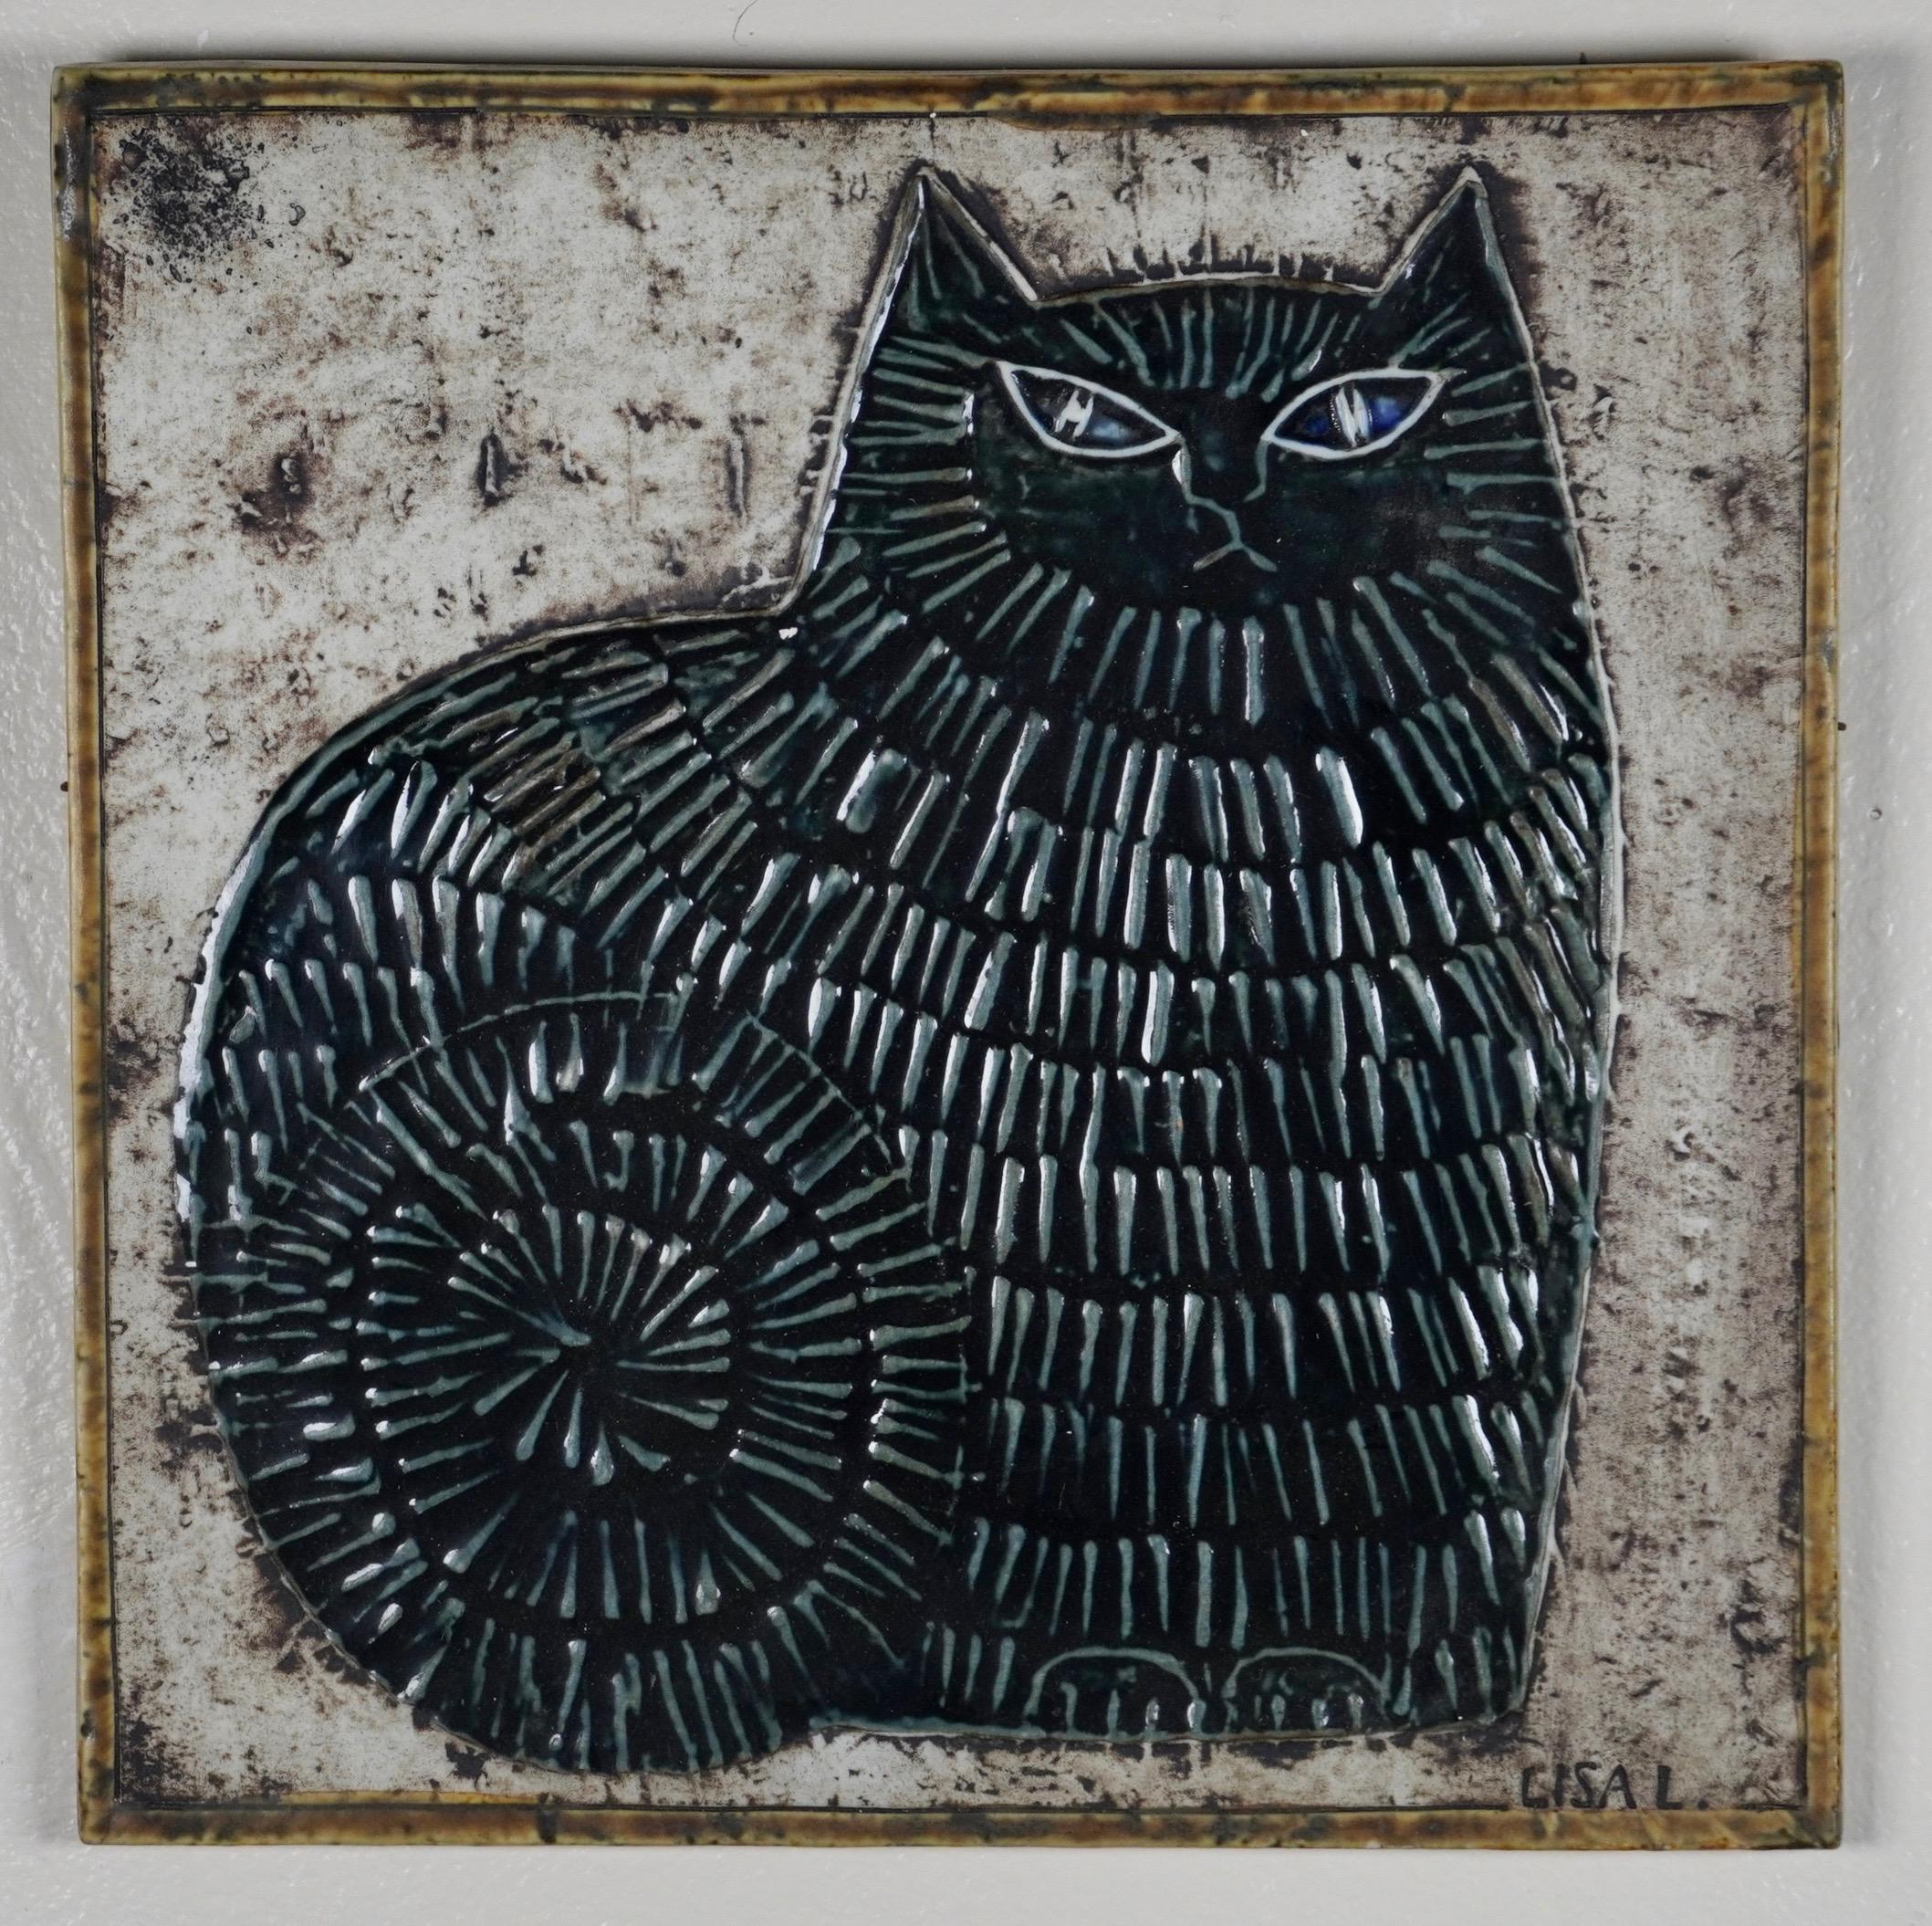 Black cat with blue eyes ceramic hanging wall tile / plaque by Swedish ceramic artist Lisa Larson (born 1931- ) circa 1960s. Square ceramic tile with raised (relief) texture on the body for the cats fur with a black glaze, the eyes have a hint of